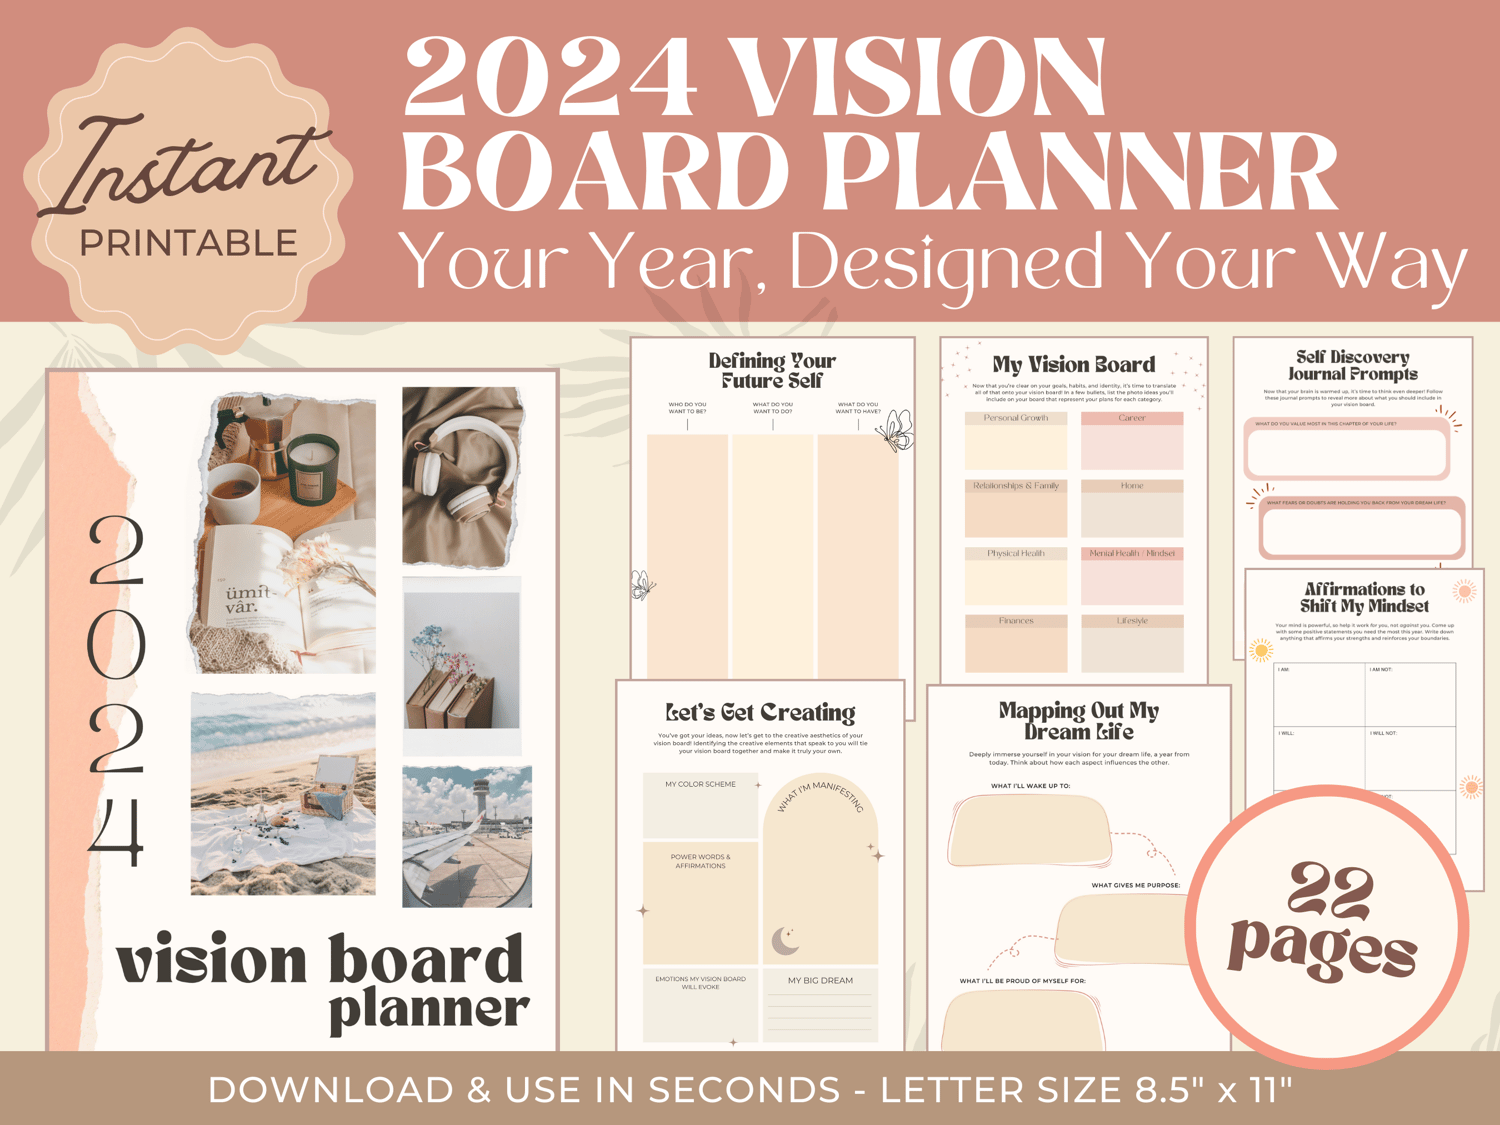 Create your own vision board. A great way to unleash your